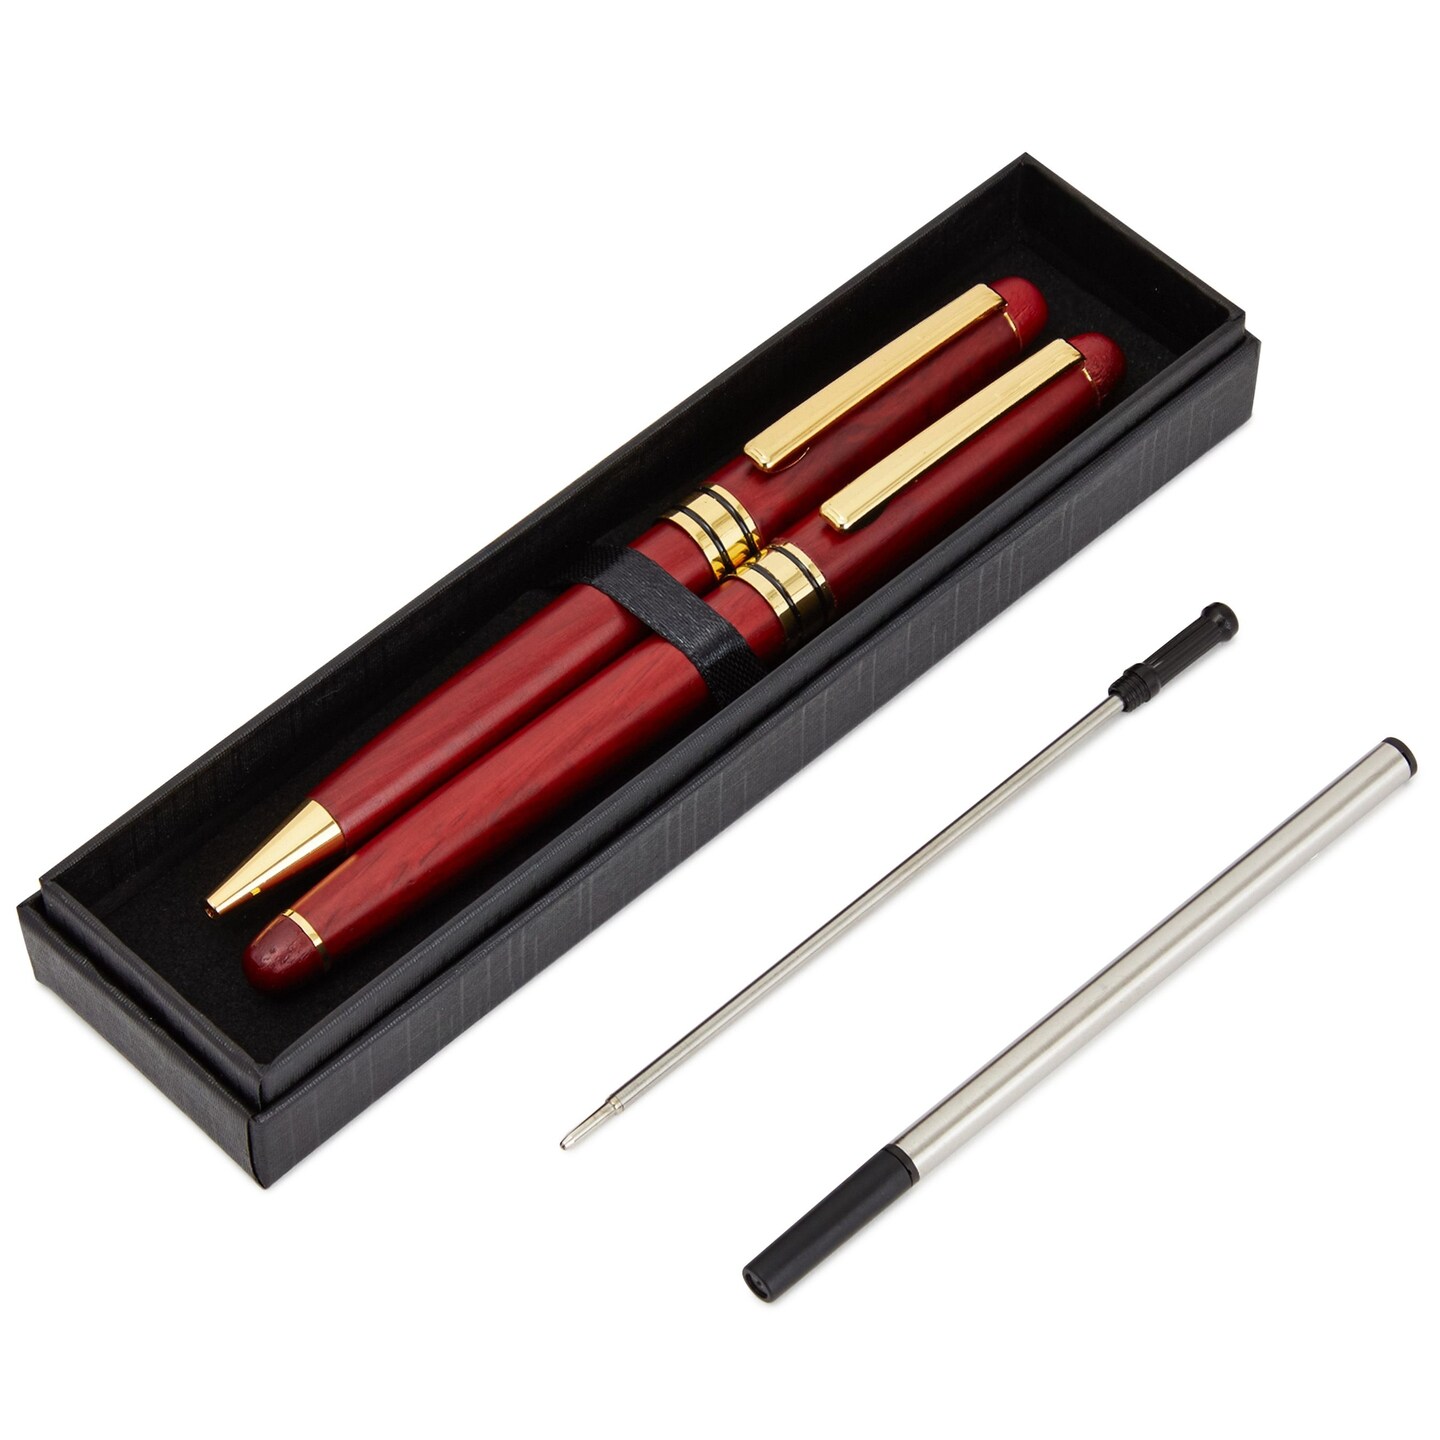 Amazon.com : Superiore Senna Italian Black Ink Gold Pen - Gift Box Luxury  Pen with Real 24K Gold Flakes and 2 Ink Cartridges - Cute, Fancy Pens for  Wedding, Gold Office Supplies